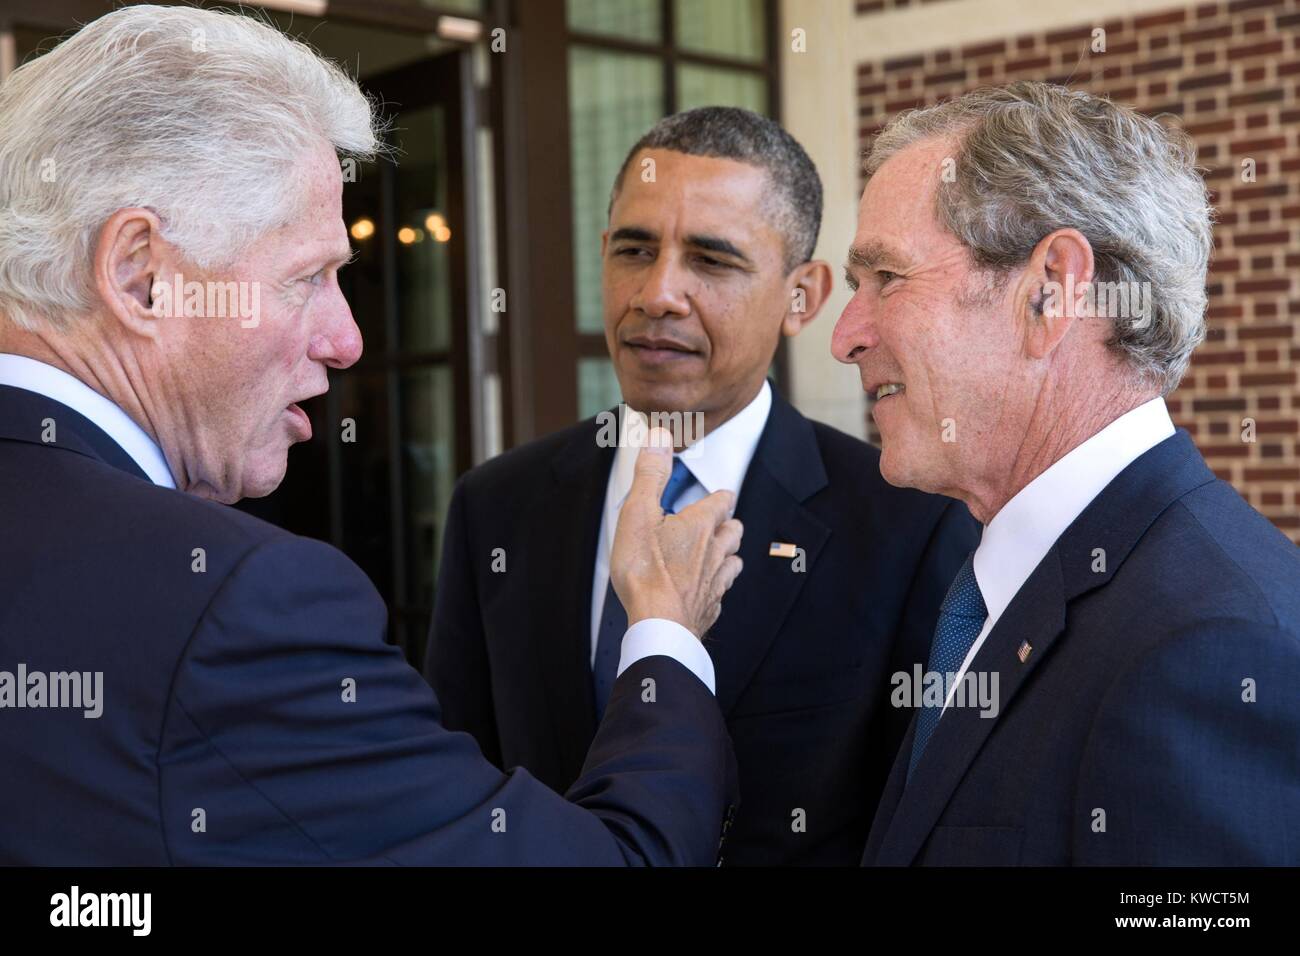 President Barack Obama with former Presidents Bill Clinton and George W. Bush. April 25, 2013. They were attending the dedication of the George W. Bush Presidential Library and Museum, Southern Methodist University, Dallas, Texas. (BSLOC 2015 3 57) Stock Photo